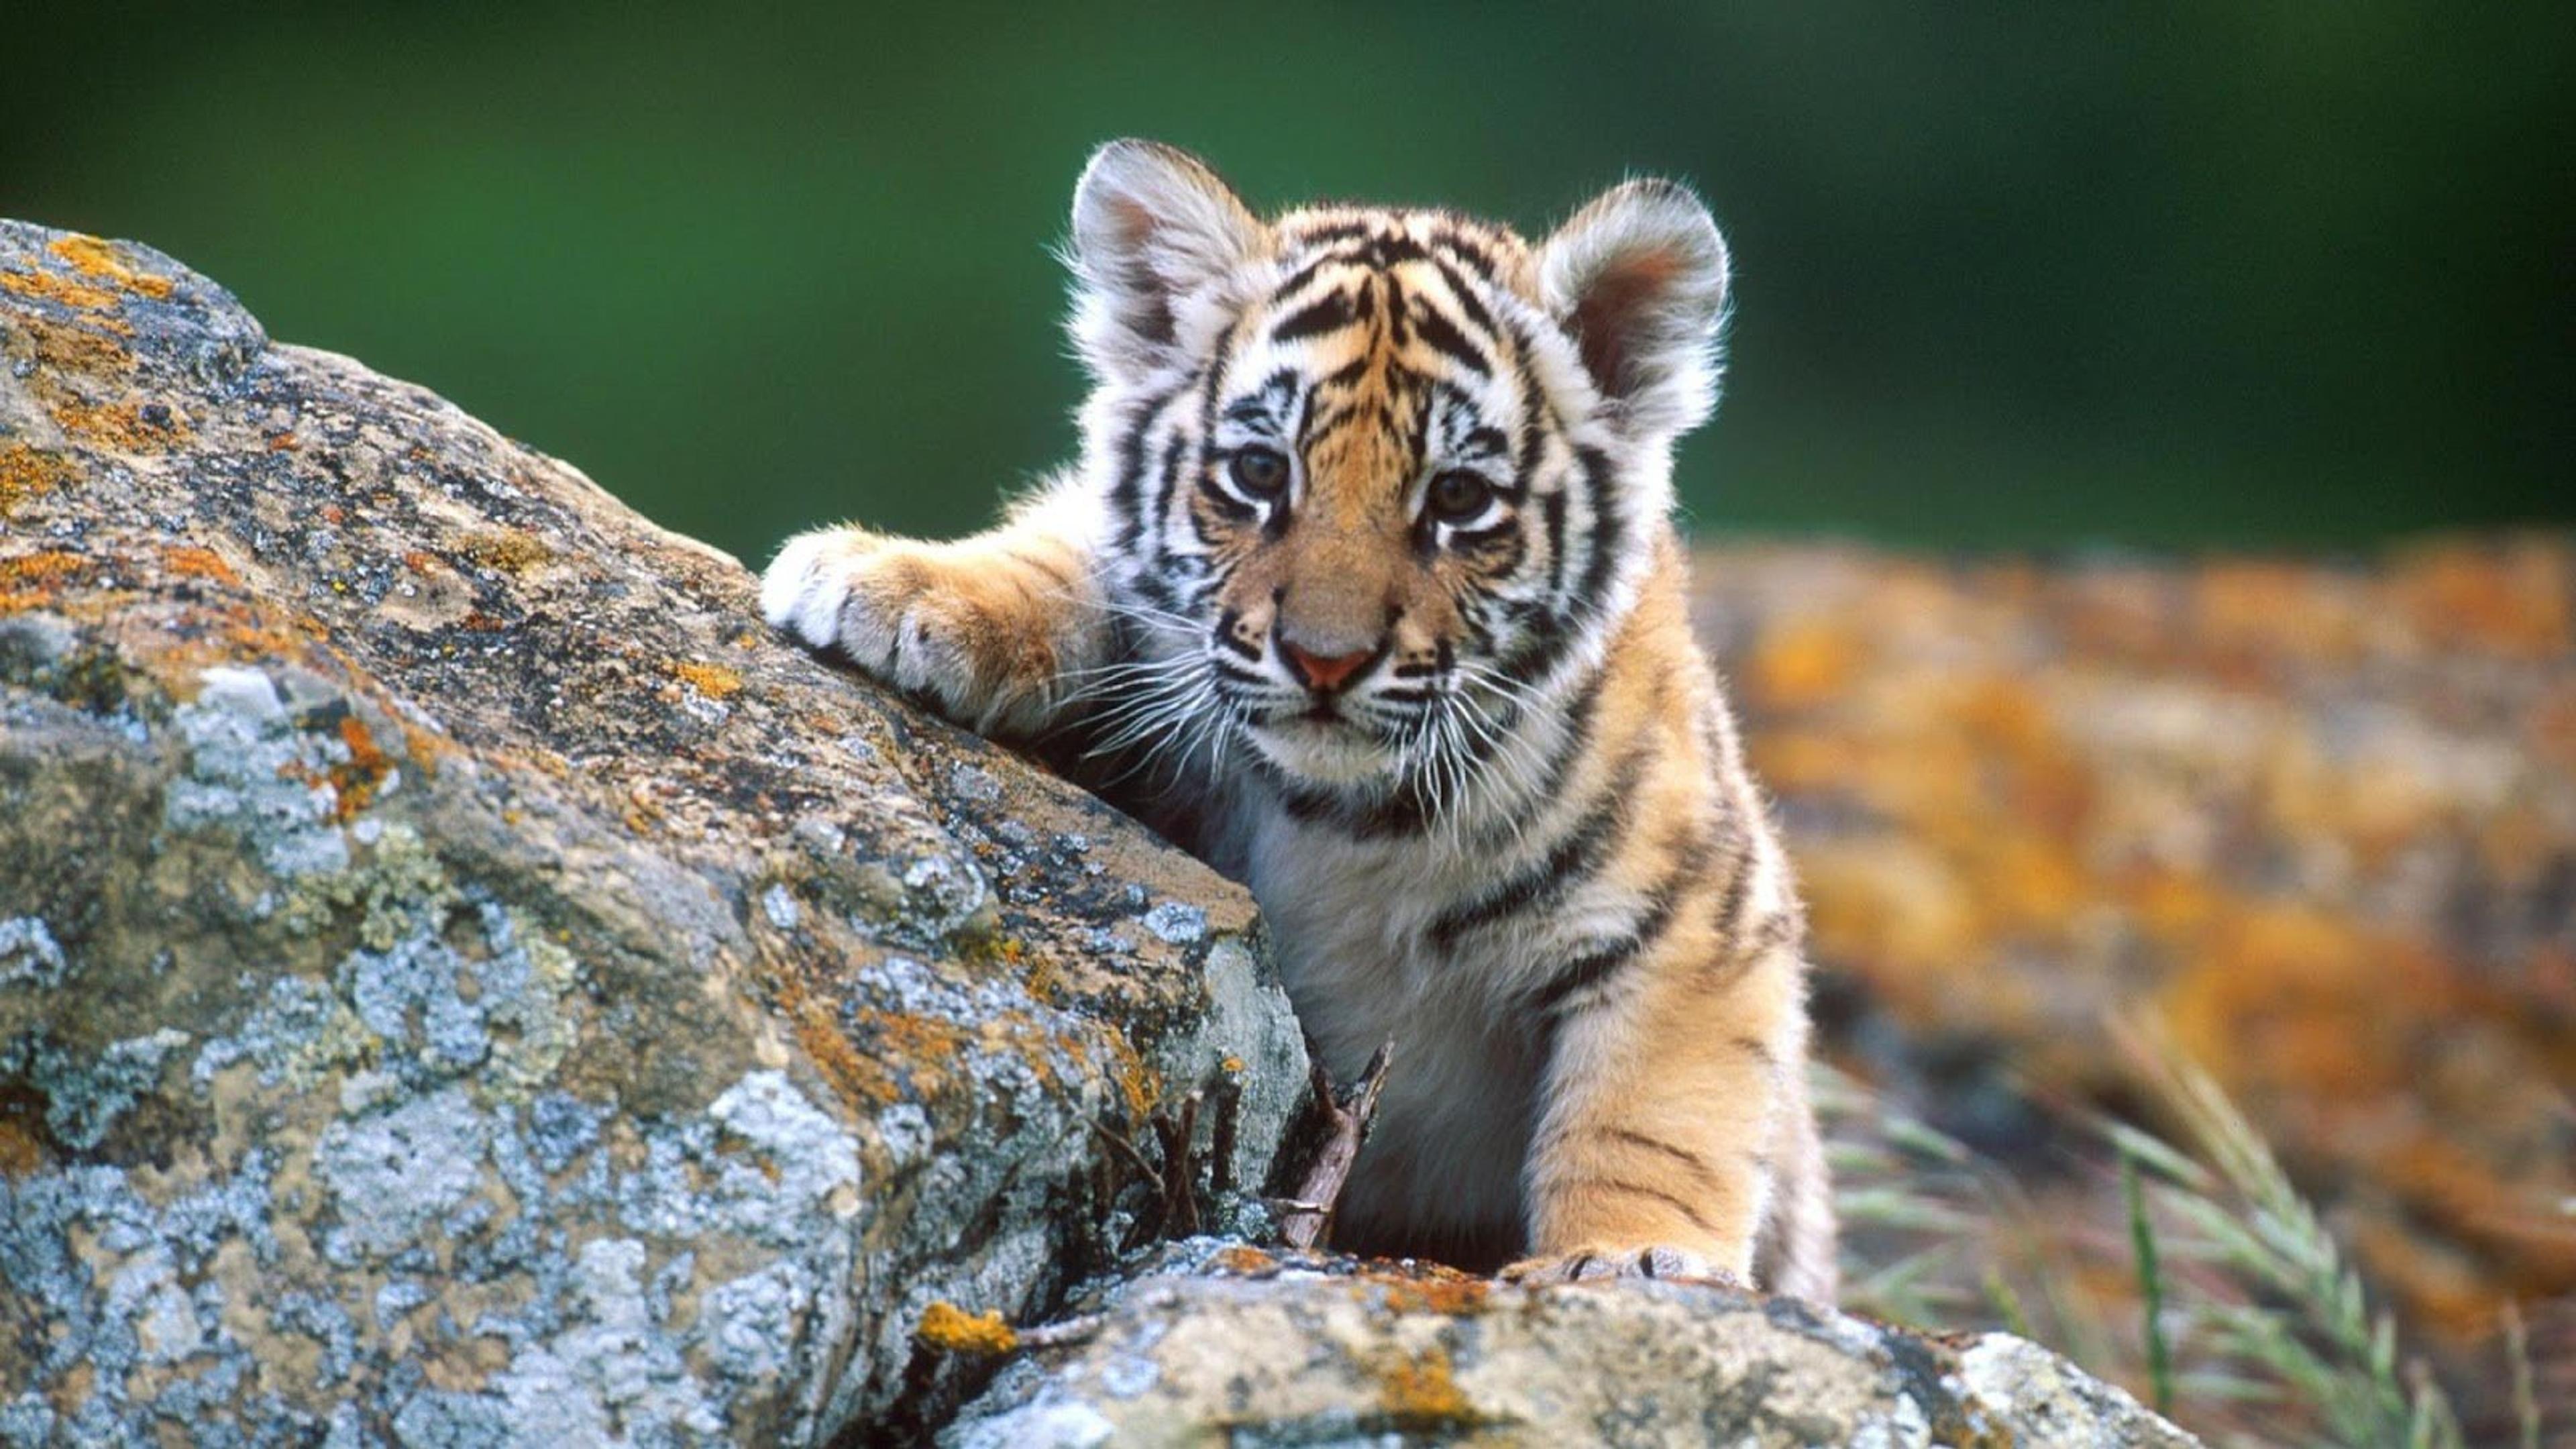 Sweet little tiger in the jungle - HD wallpaper wild animals